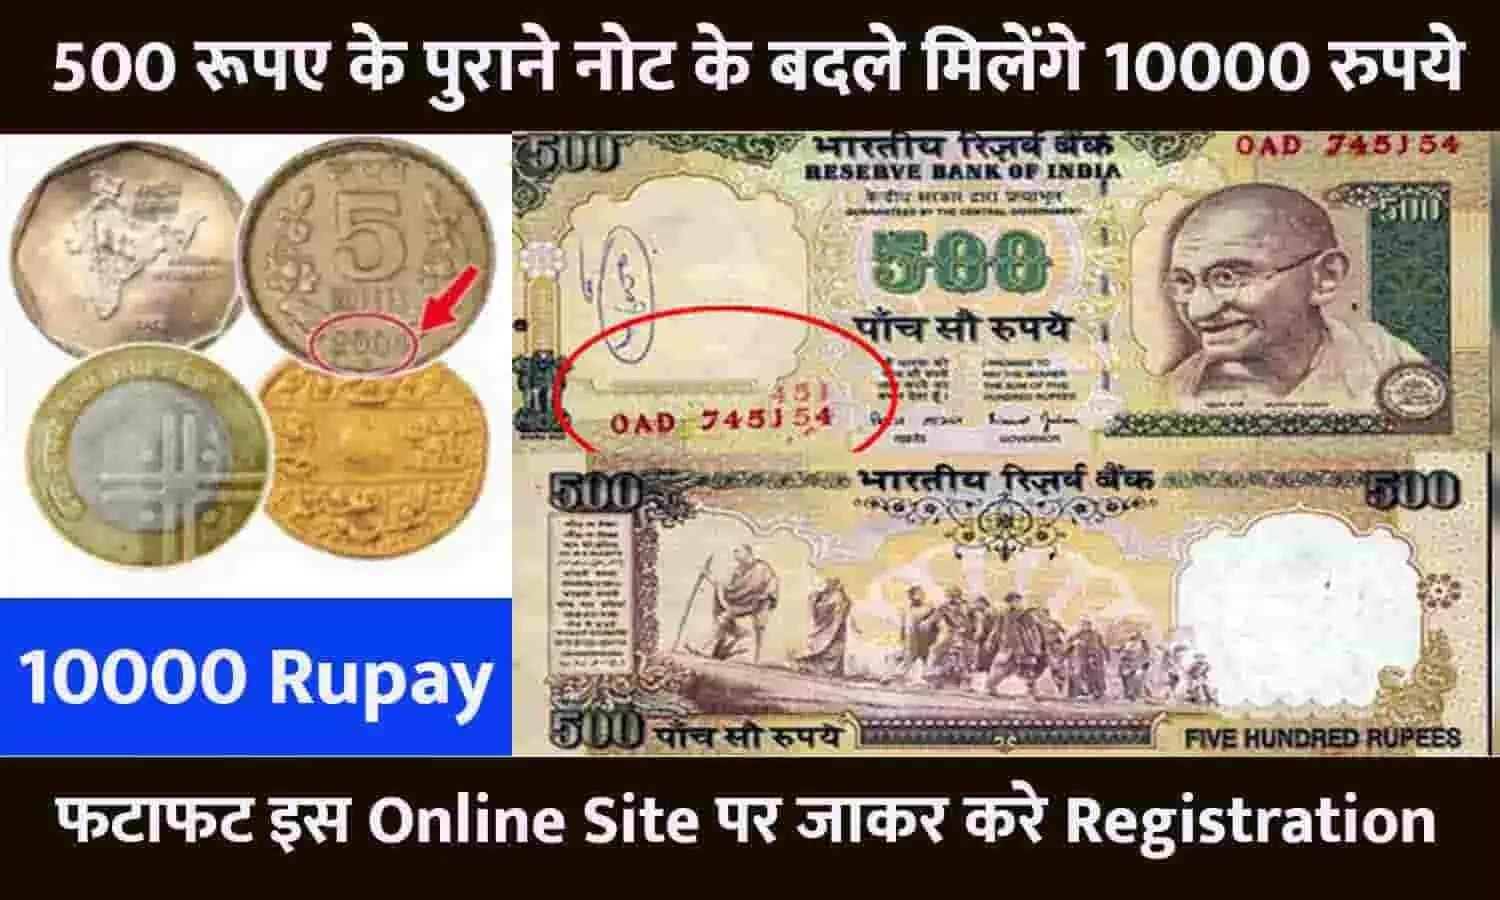 100 rs note